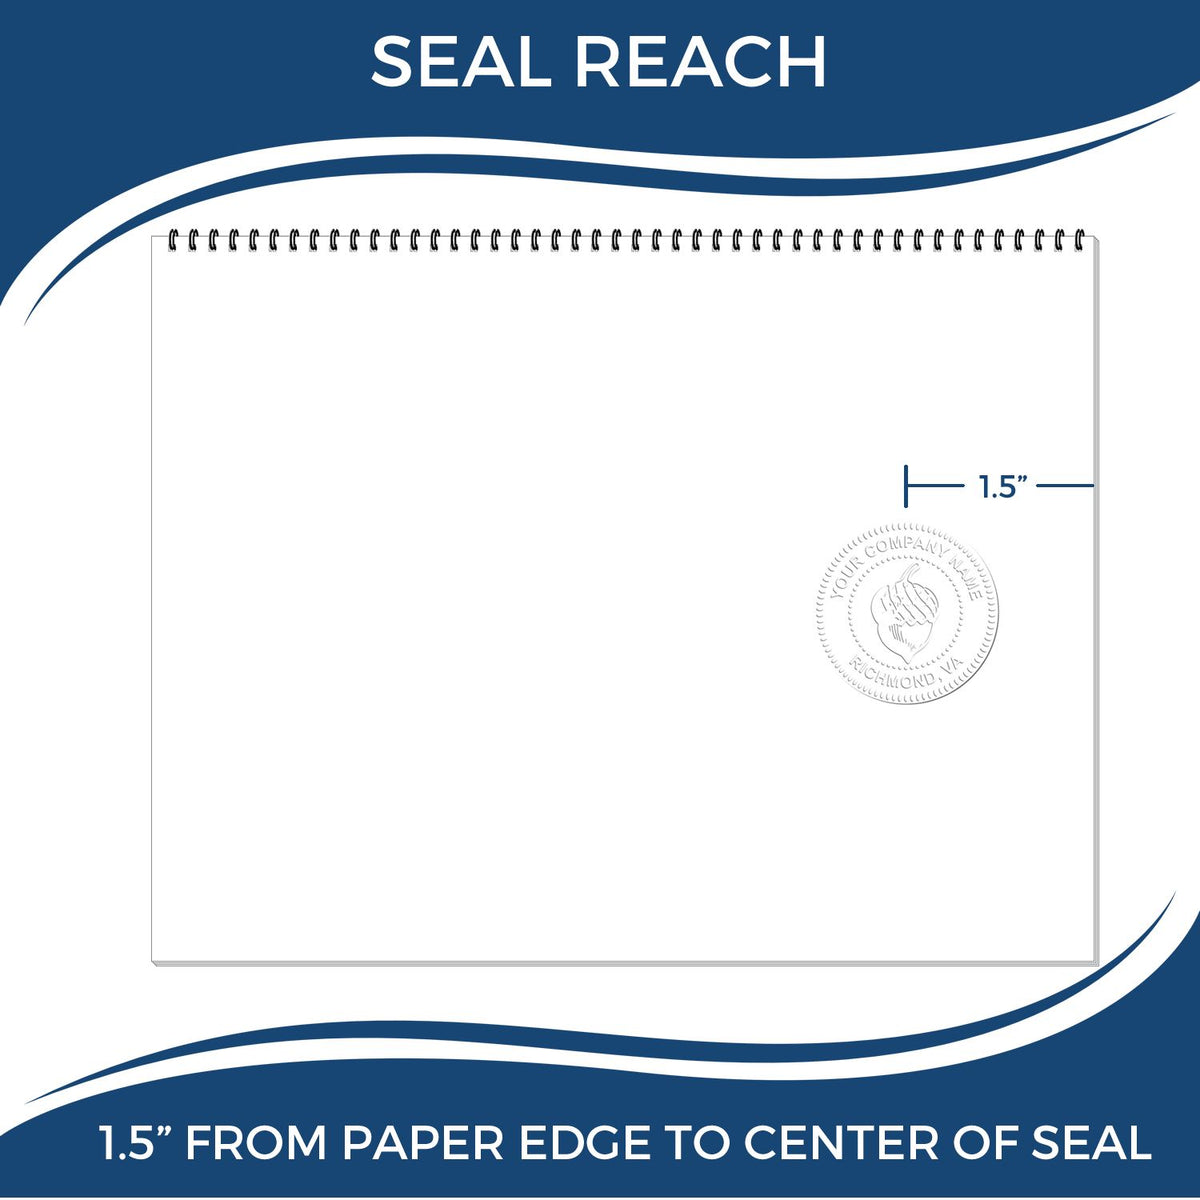 An infographic showing the seal reach which is represented by a ruler and a miniature seal image of the Gift Texas Architect Seal